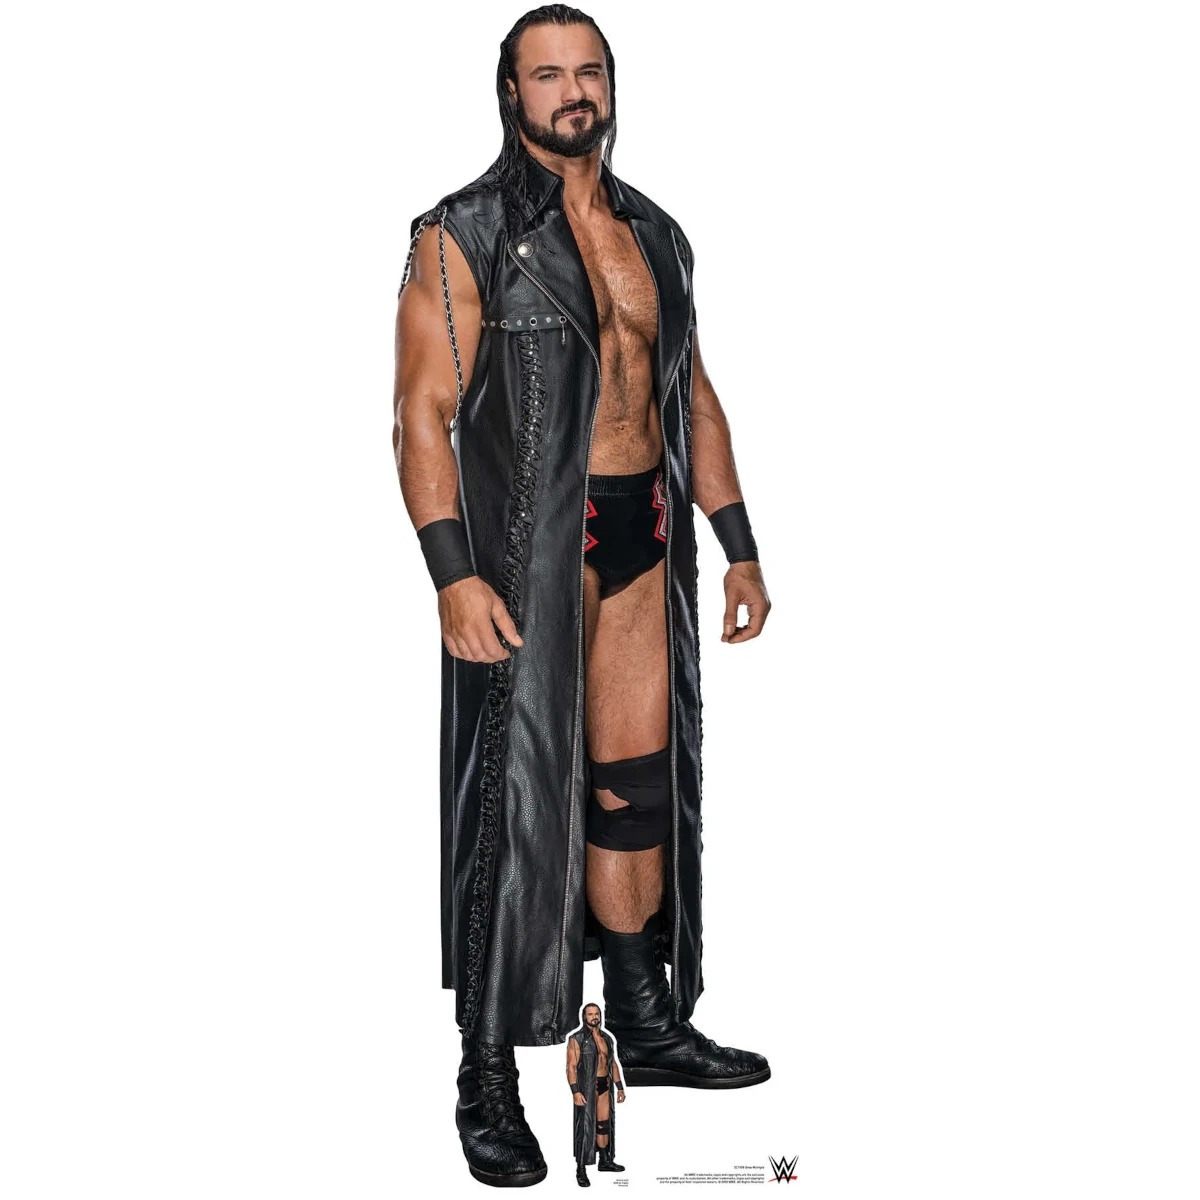 SC1598 Drew McIntyre (WWE) Official Lifesize + Mini Cardboard Cutout Standee Front